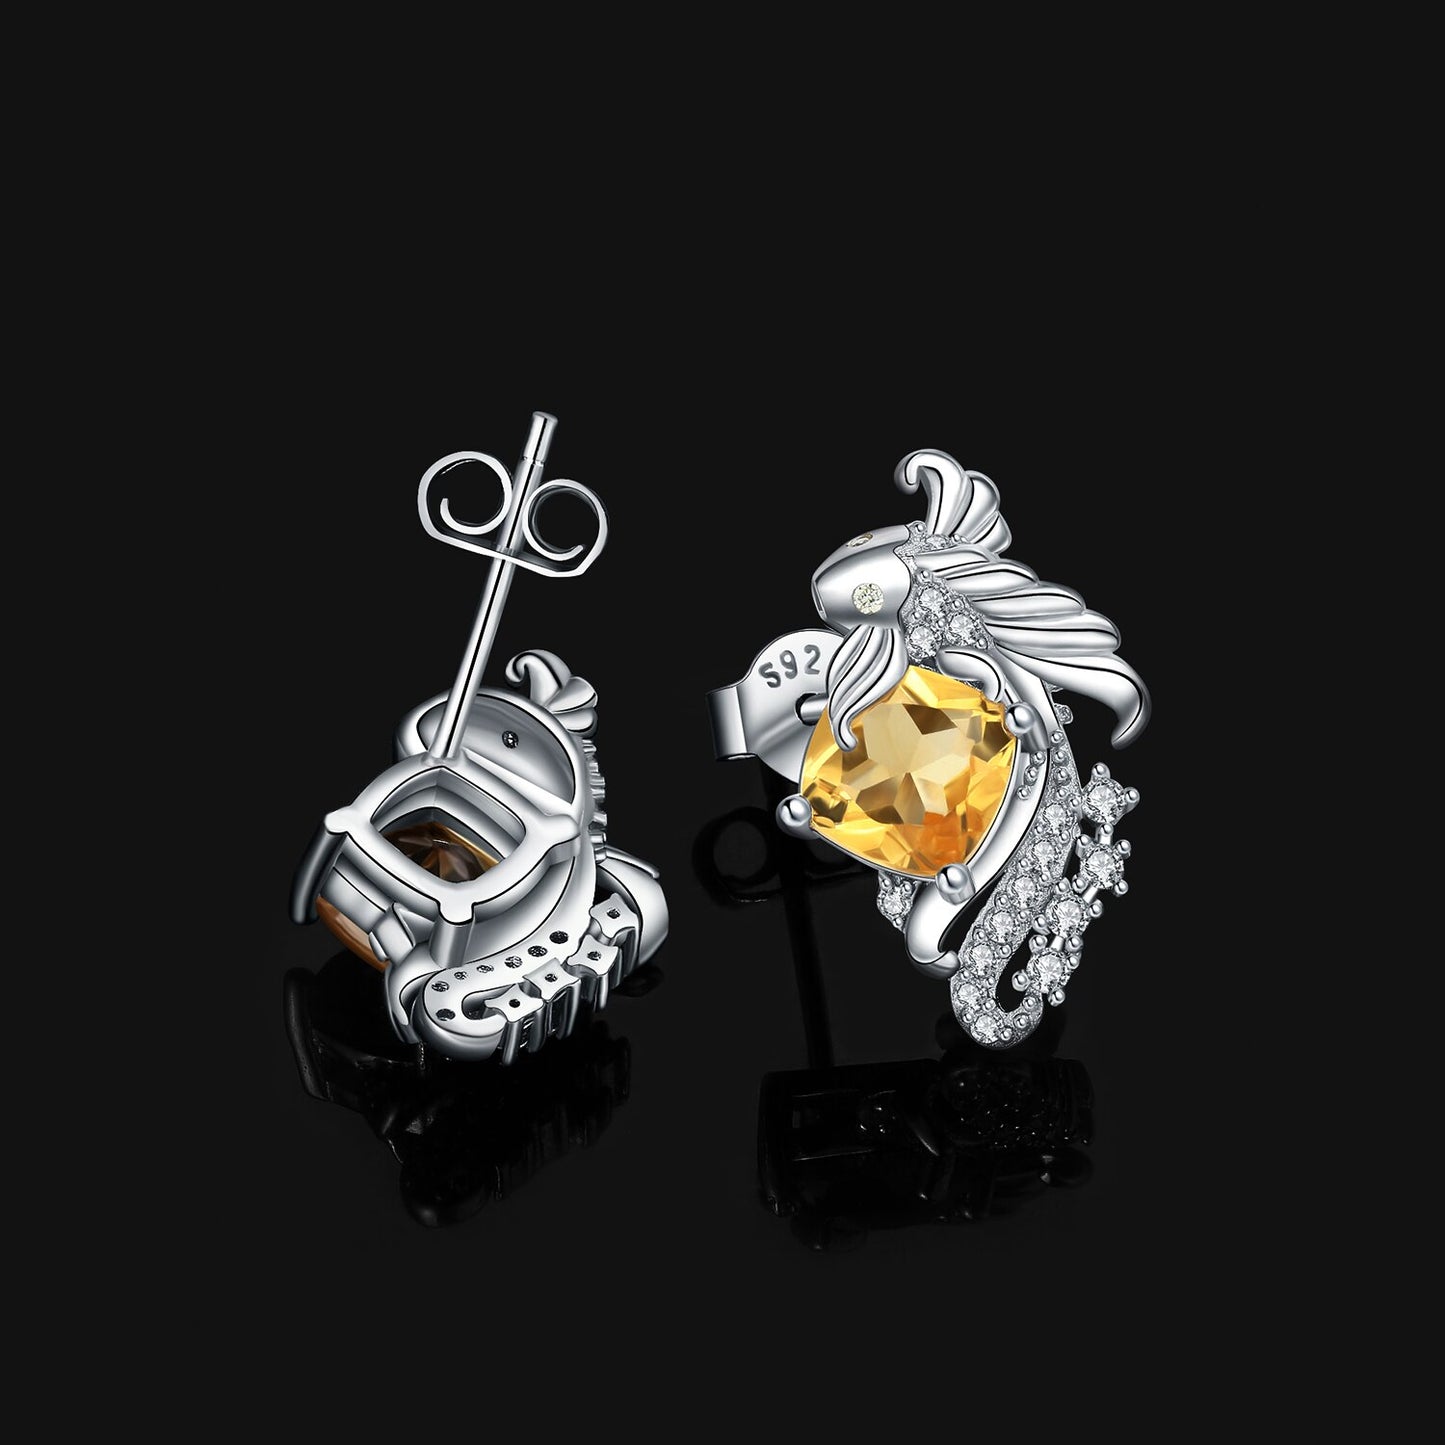 JewelryPalace New Arrival Lucky Koi Fish Cushion Genuine Citrine 925 Sterling Silver Stud Earrings For Woman Fashion Jewelry